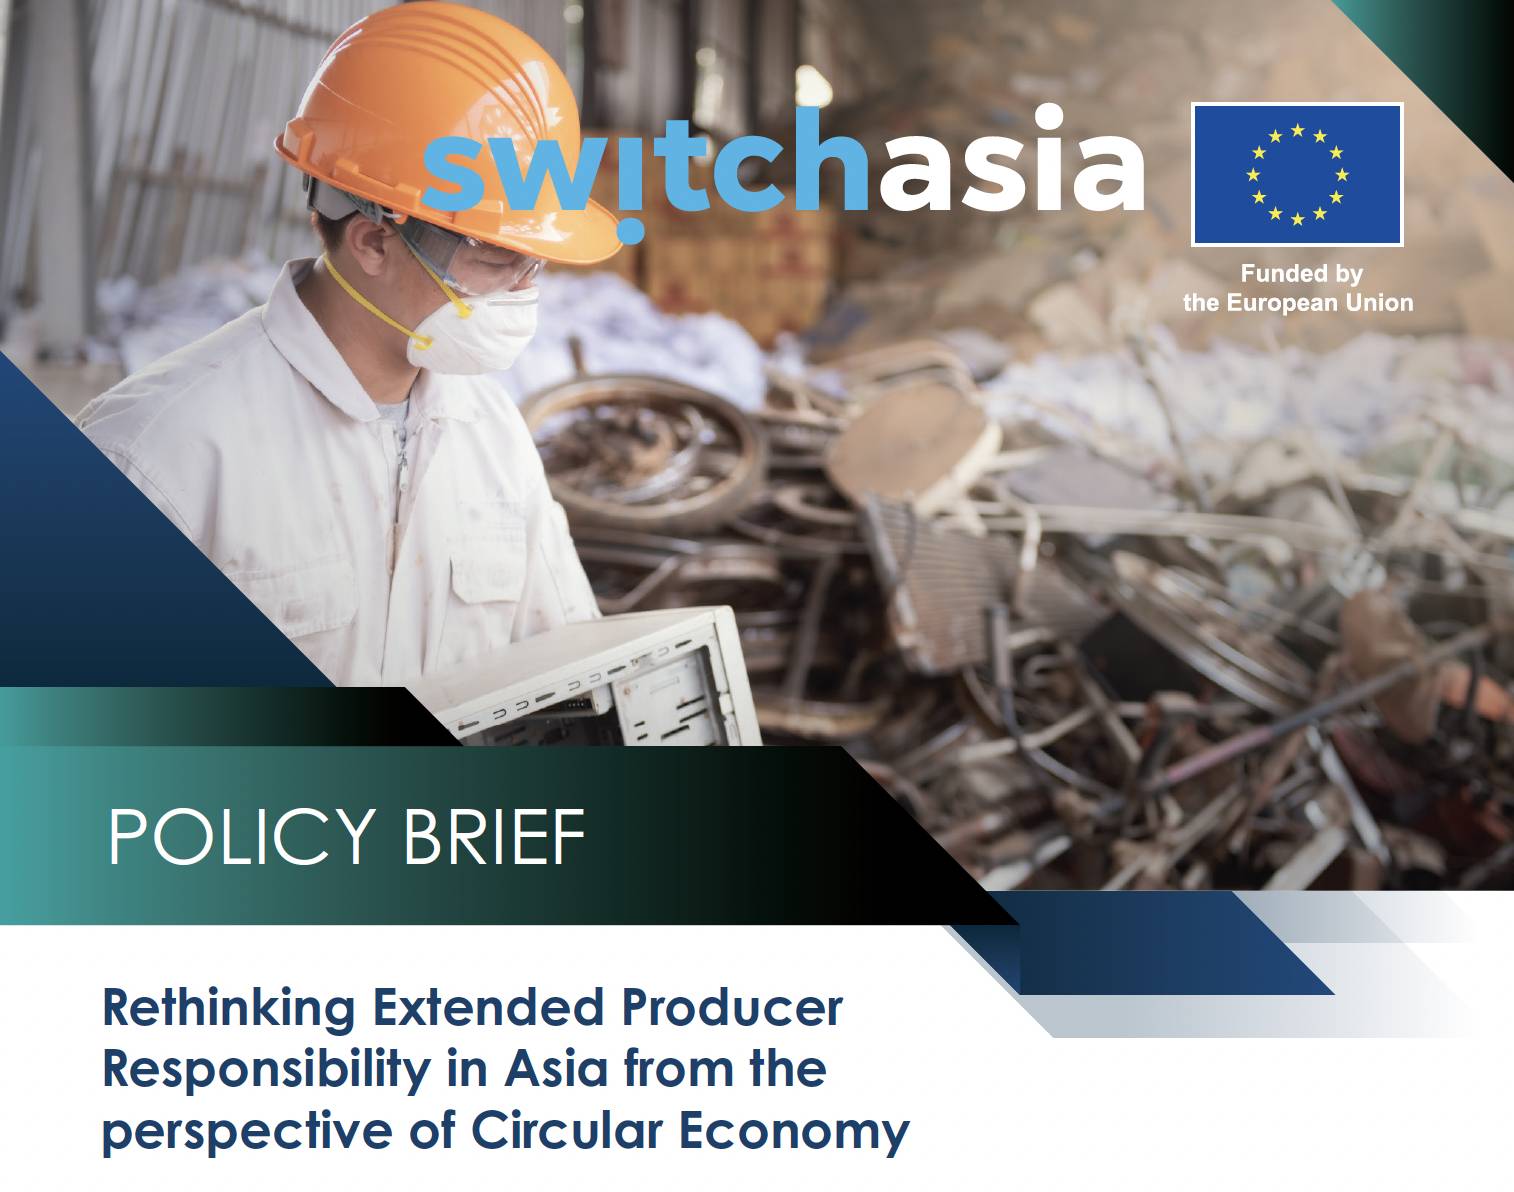 Rethinking Extended Producer Responsibility in Asia from the perspective of Circular Economy